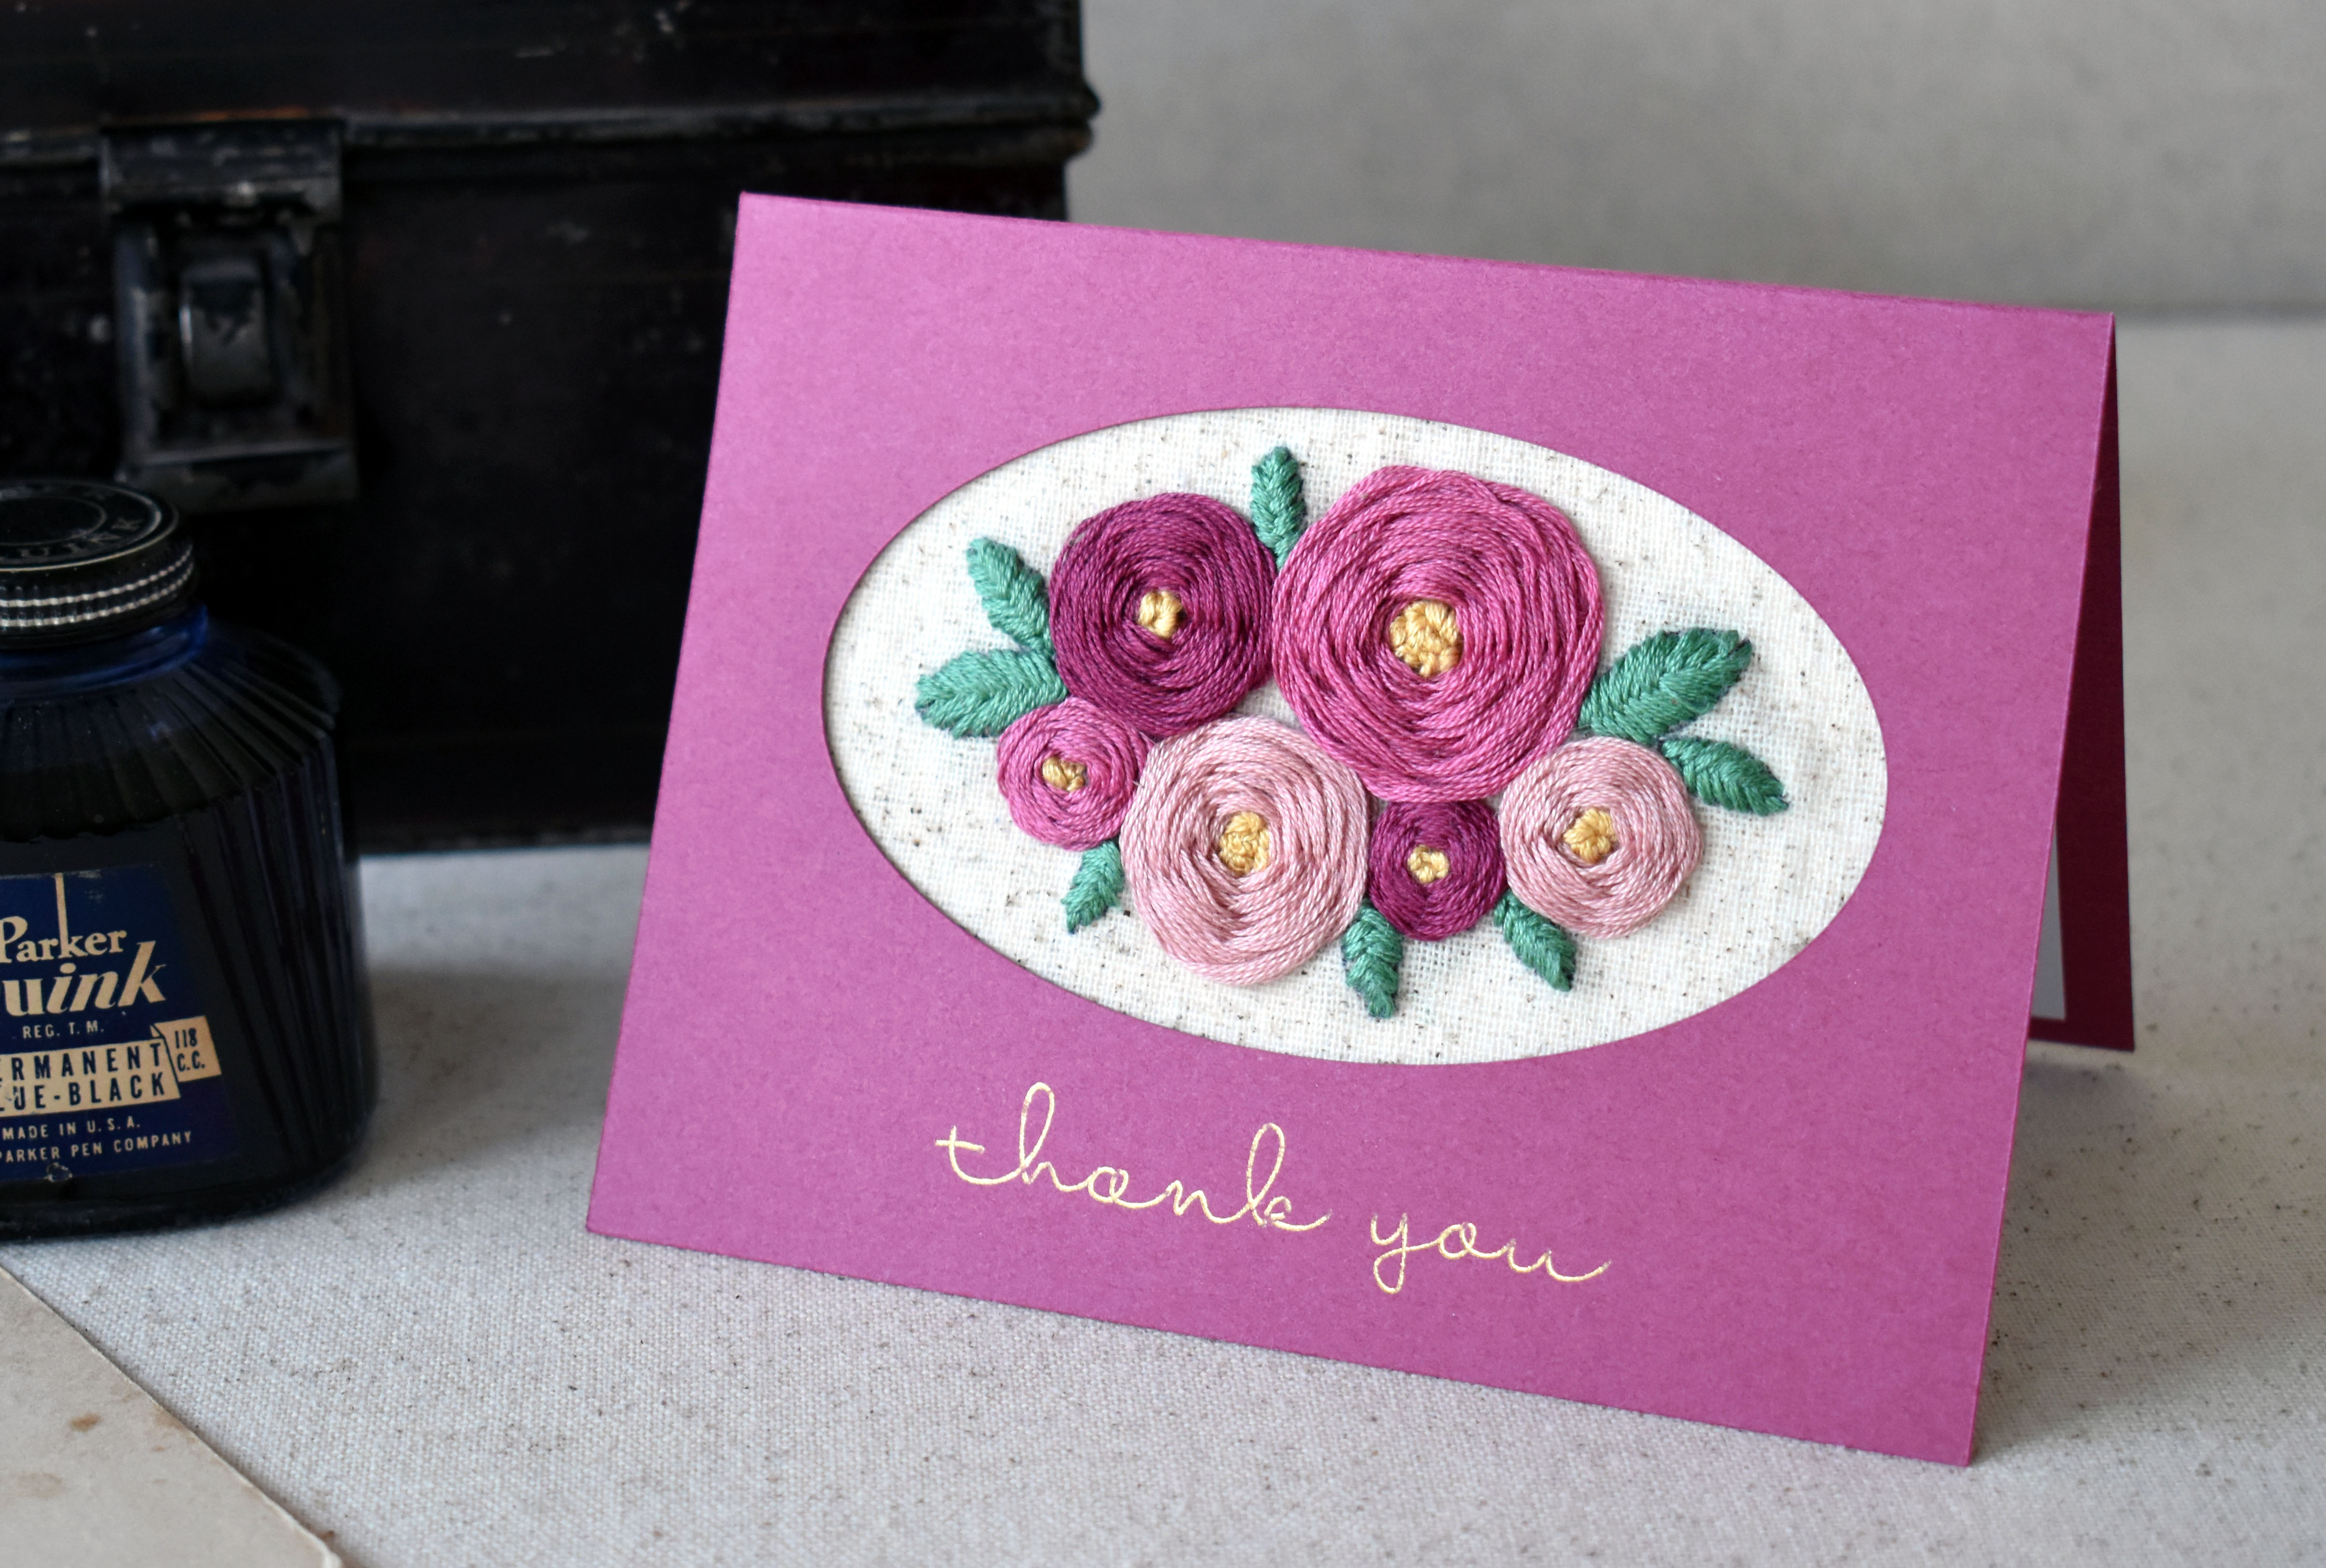 Hand Embroidered Bundle of Roses Card